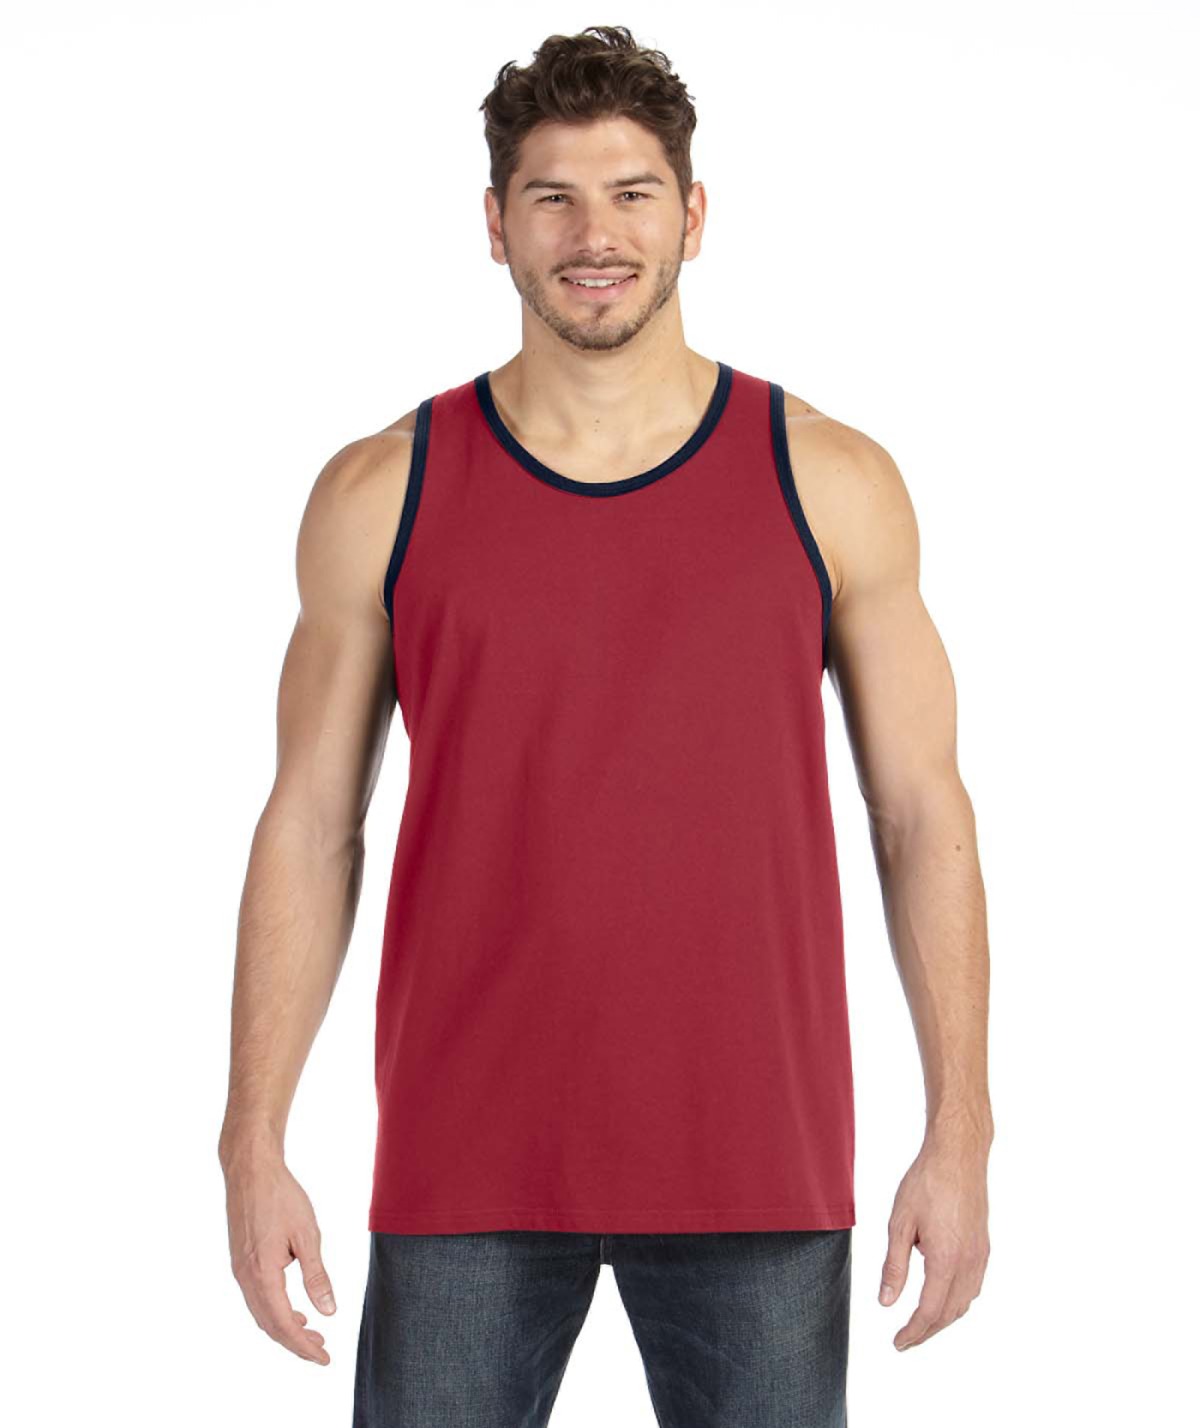 click to view Independence Red/Navy